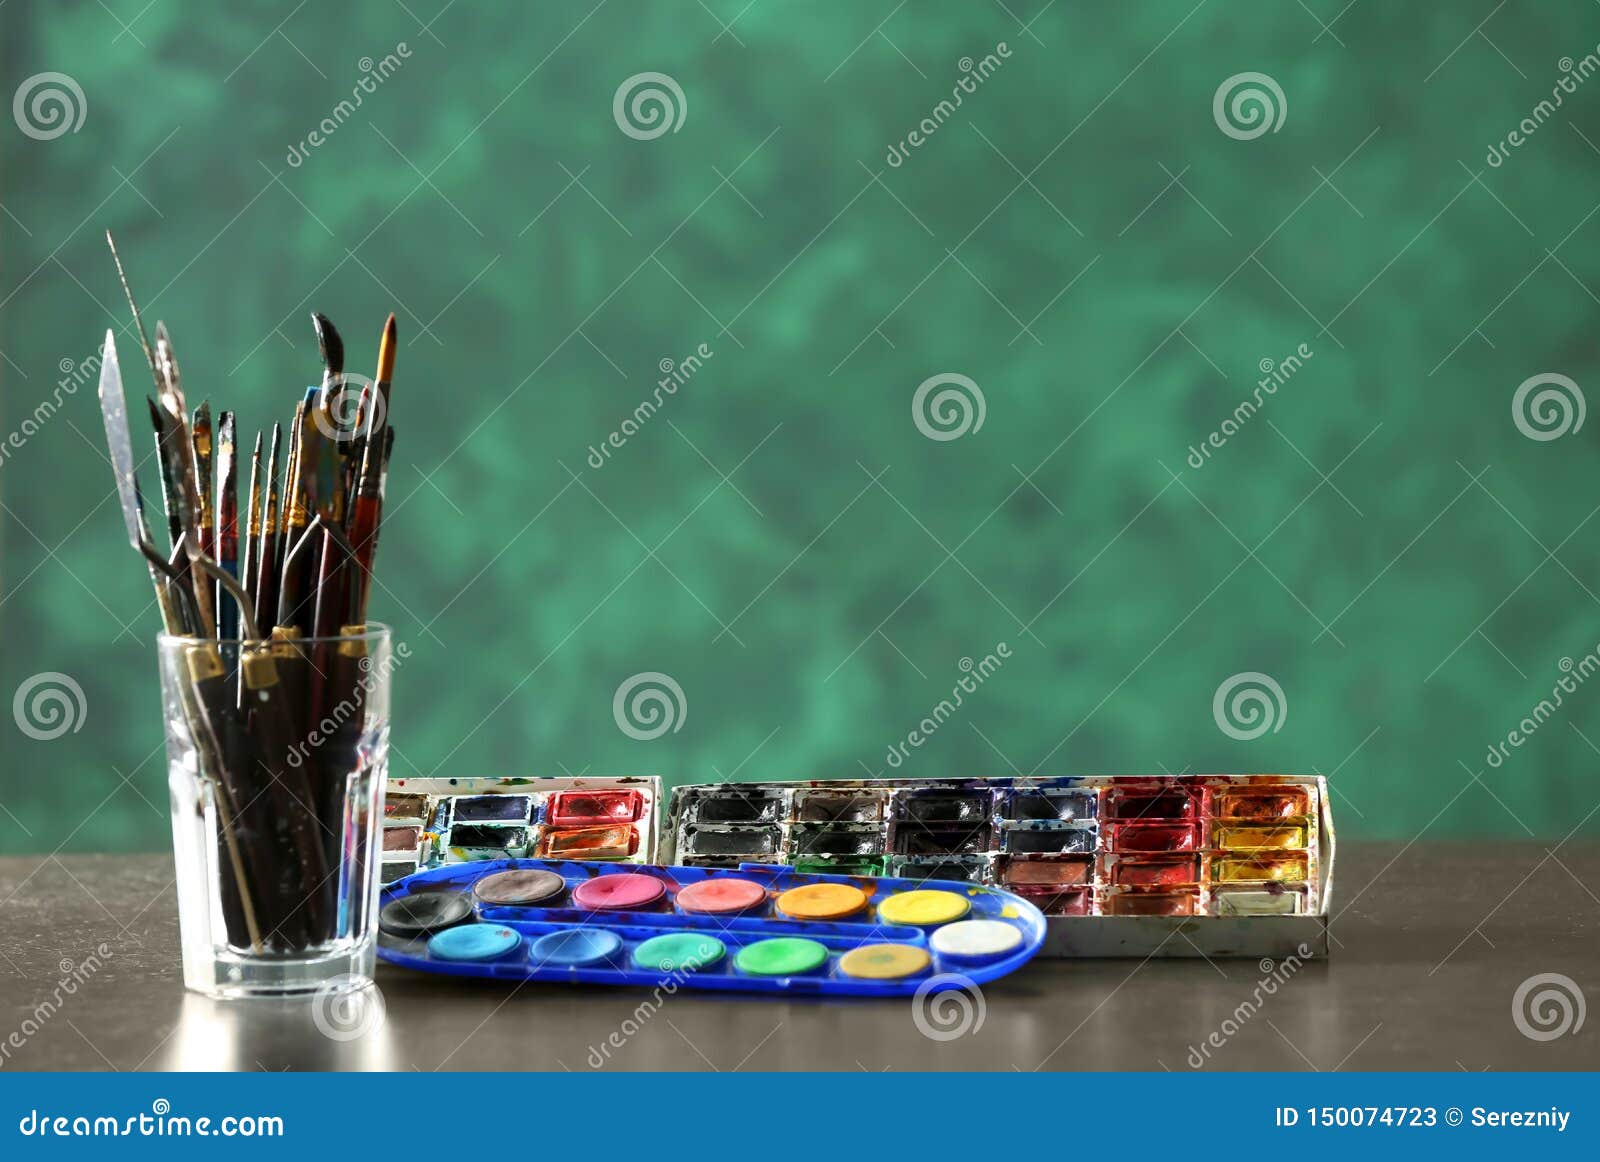 Glass With Paint Tools And Watercolors On Table Stock Image Image Of